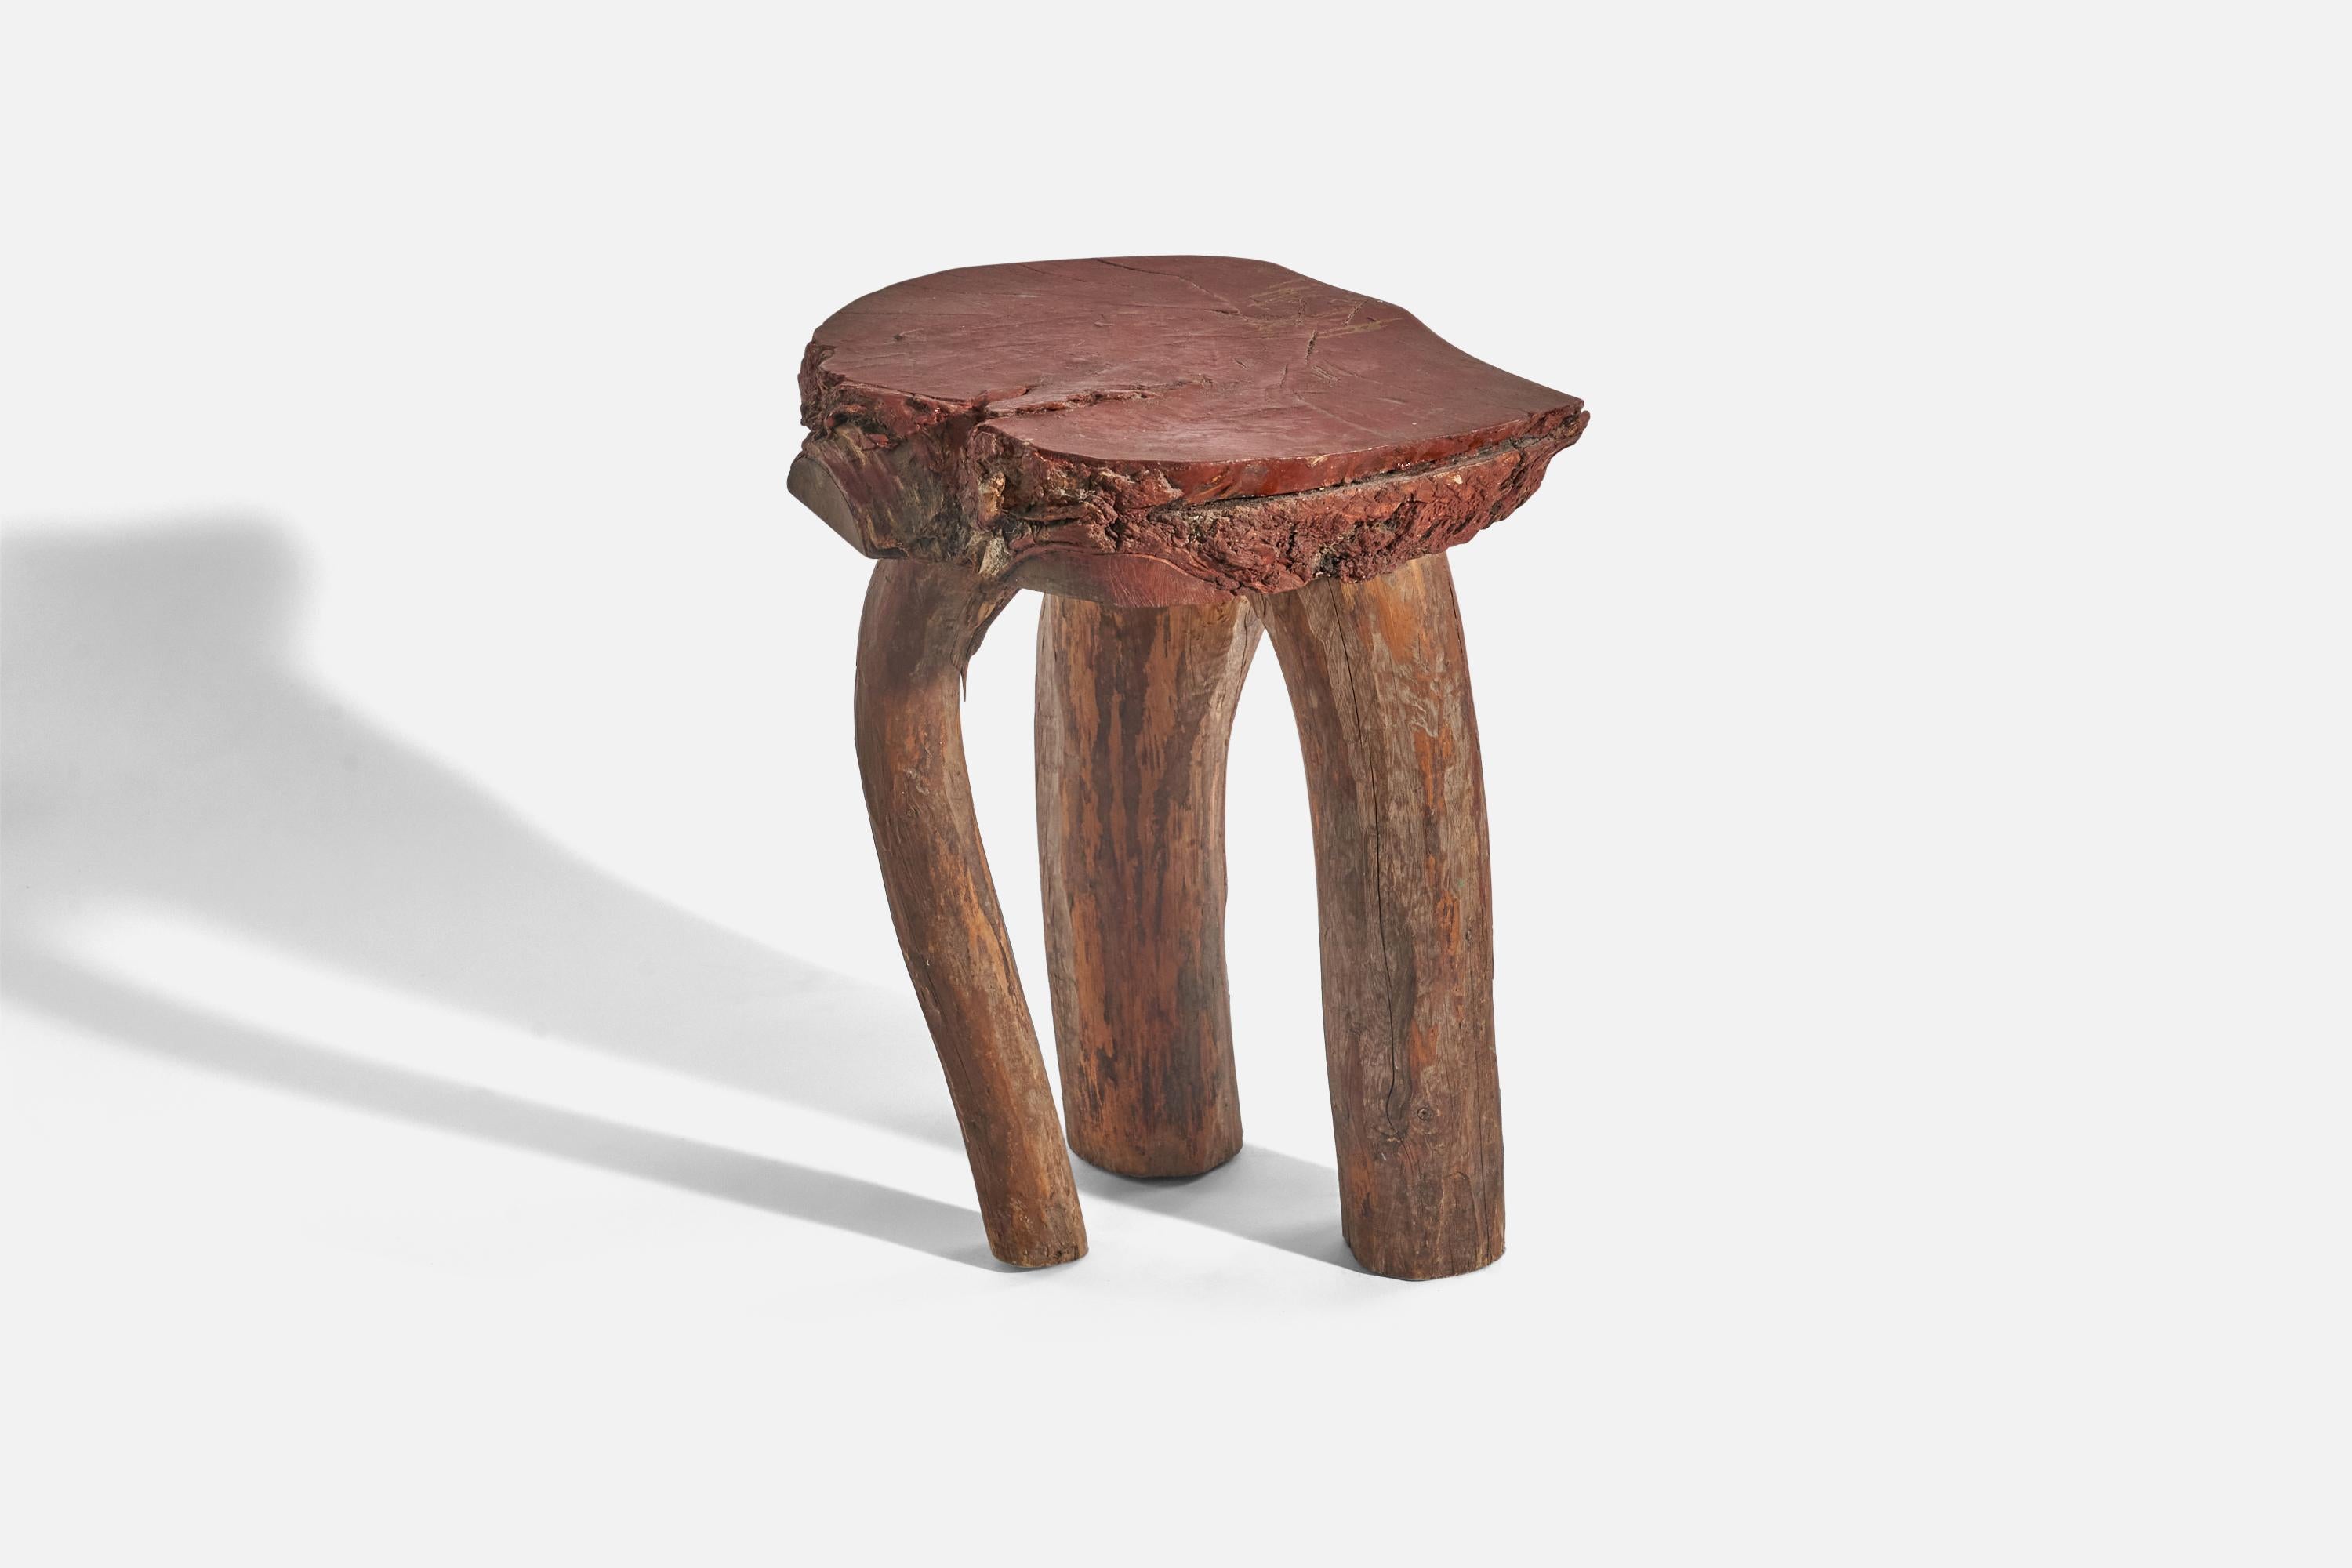 A wooden side table or stool painted in 